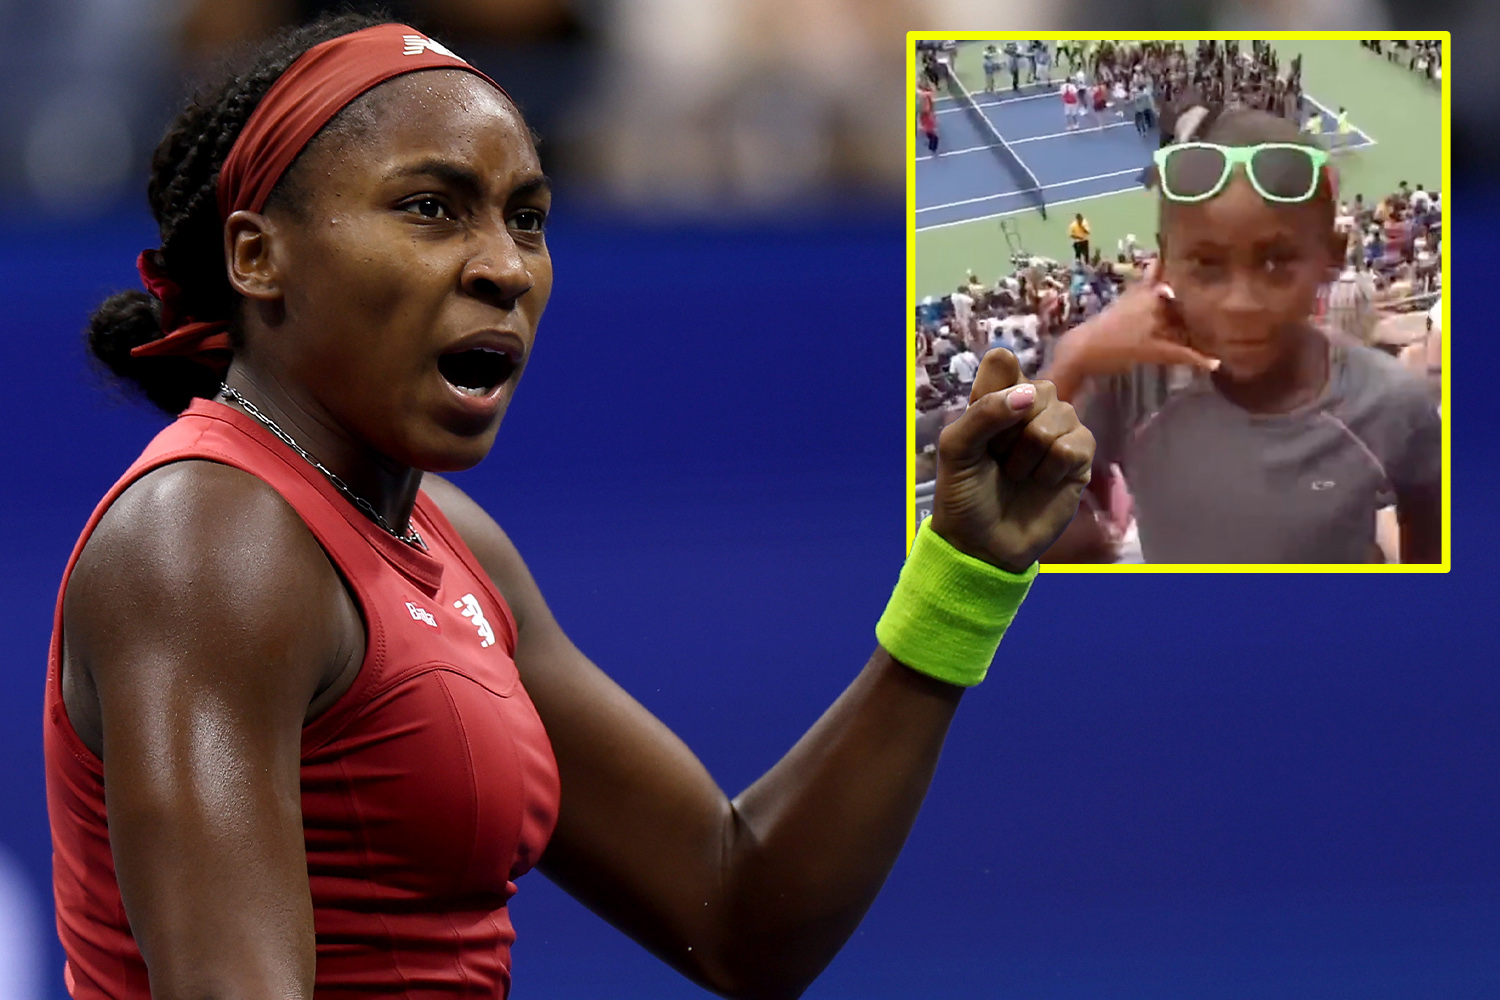 Footage shows an eight-year-old Coco Gauff dancing at US Open 11 years before winning first-ever grand slam